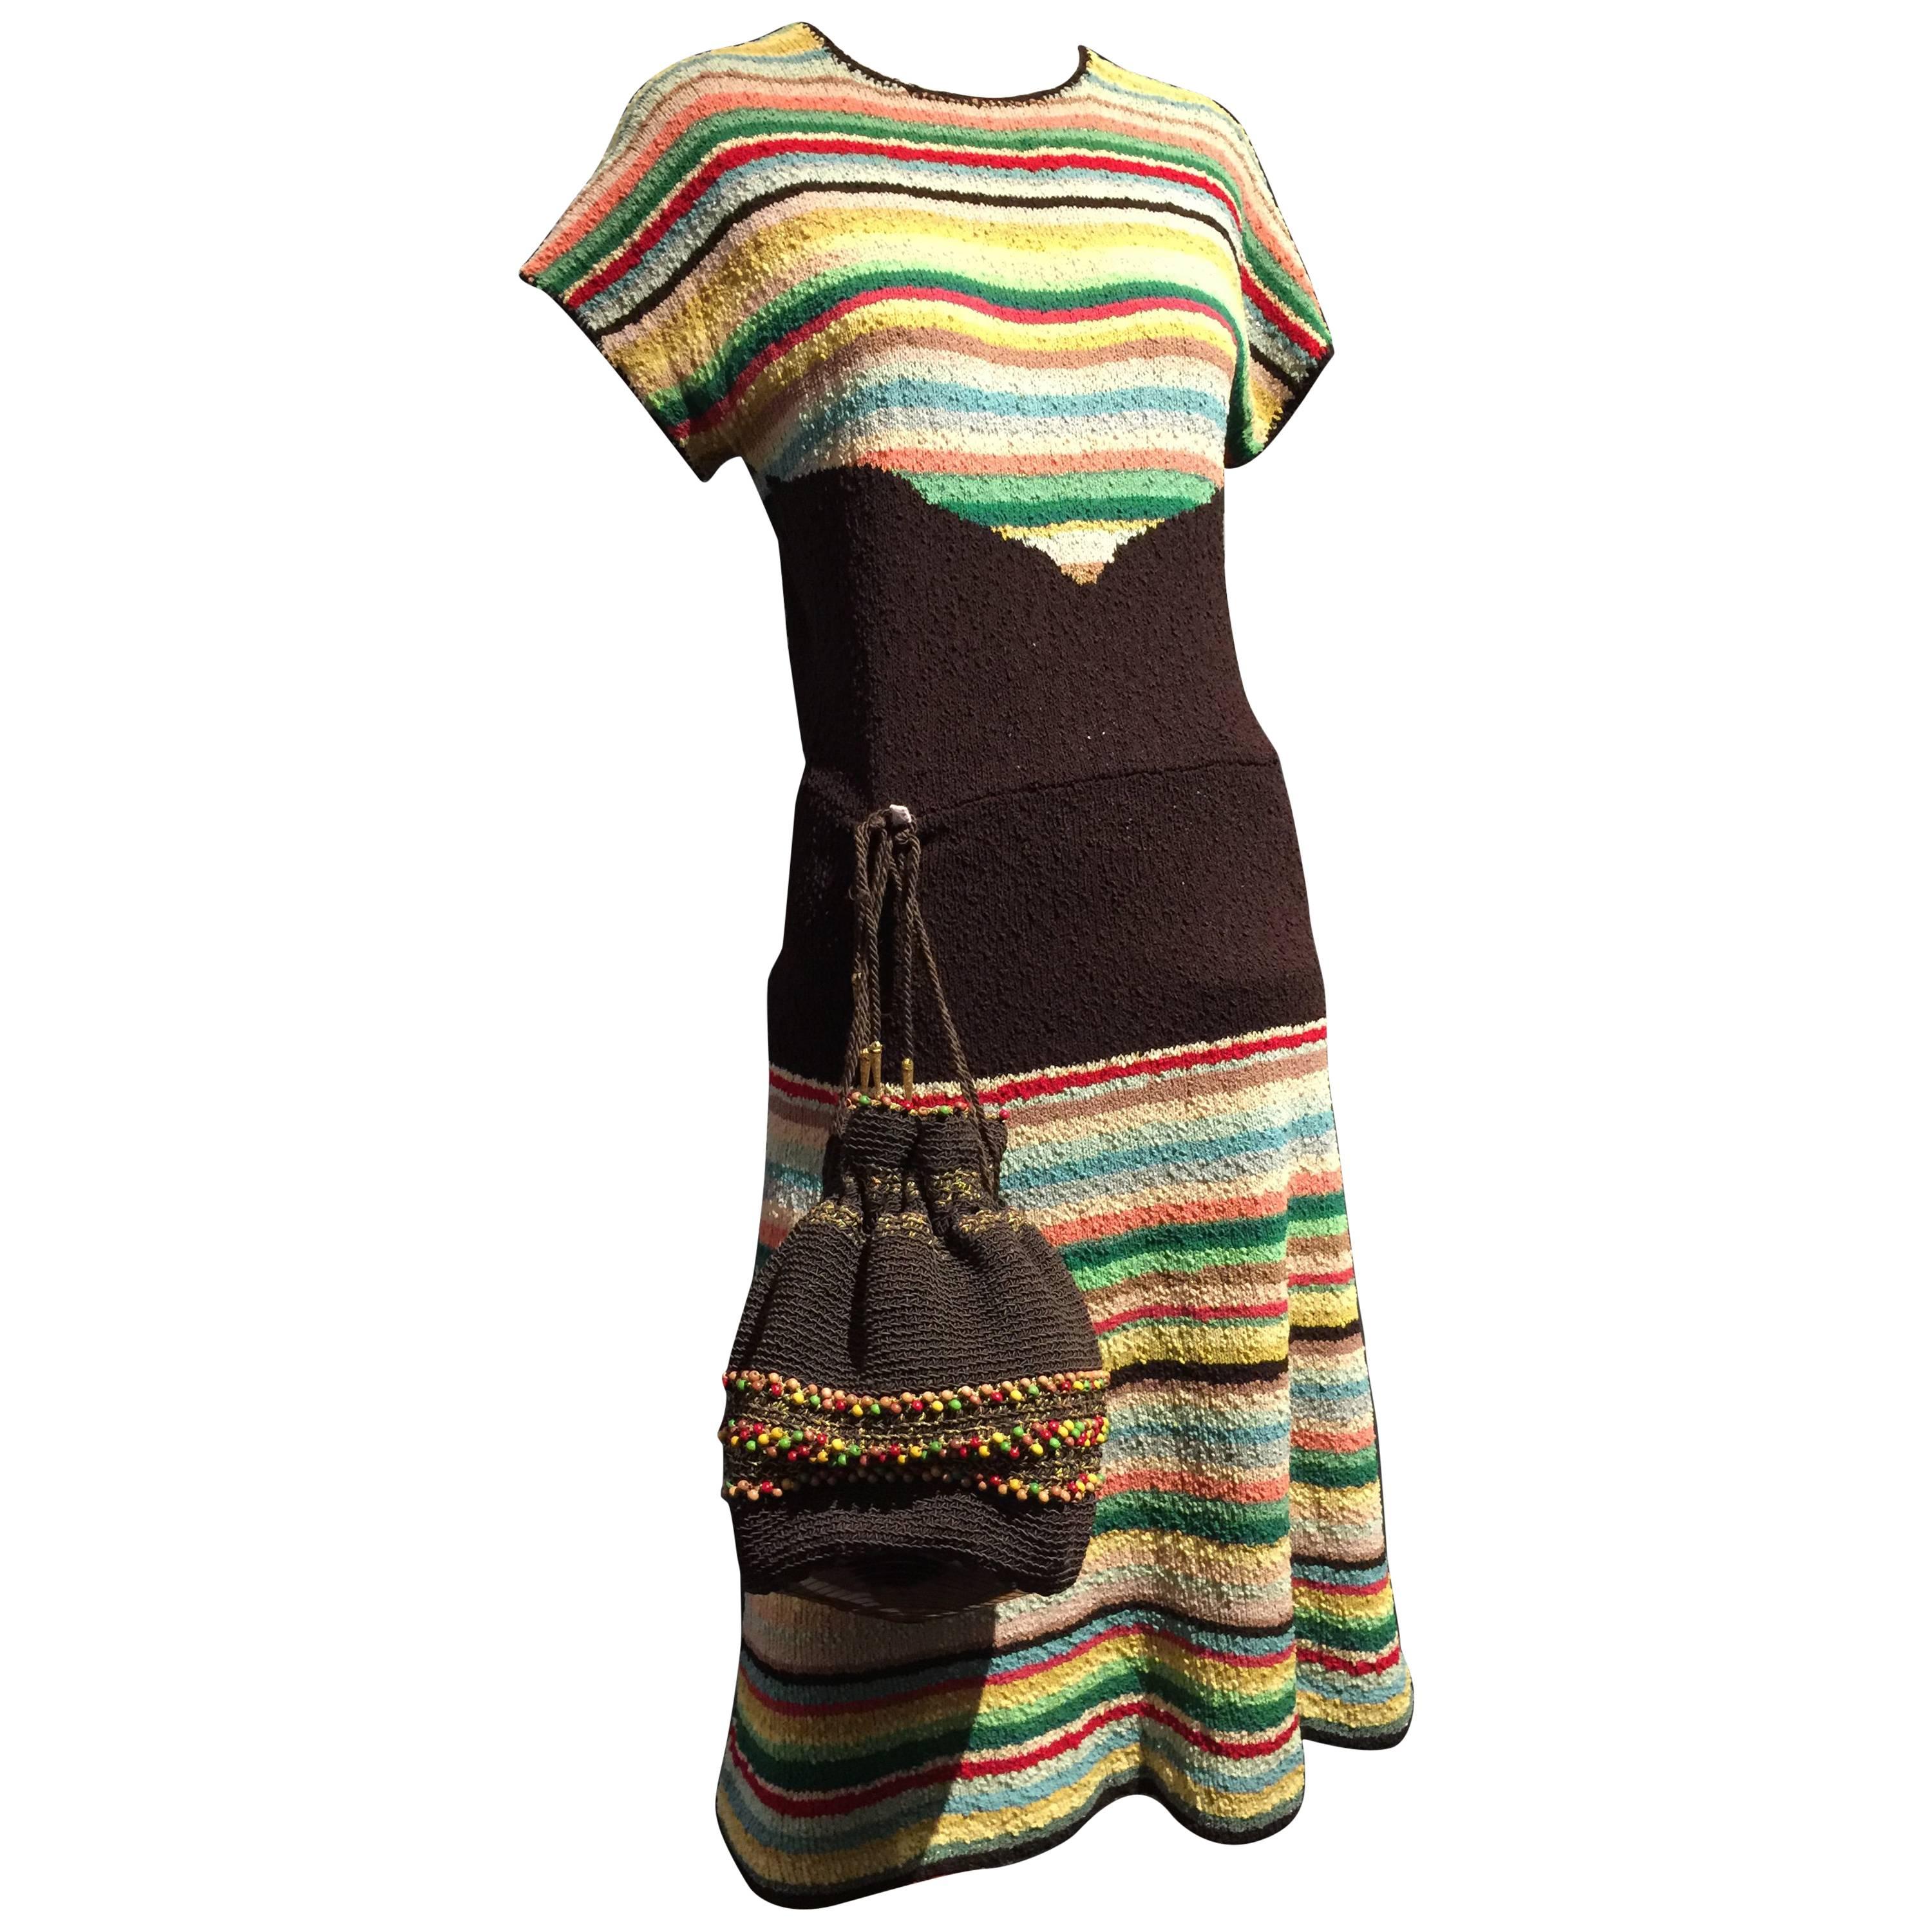 1940s Multi-Color Stripe Boucle Knit Dress with Coordinating Knit Purse